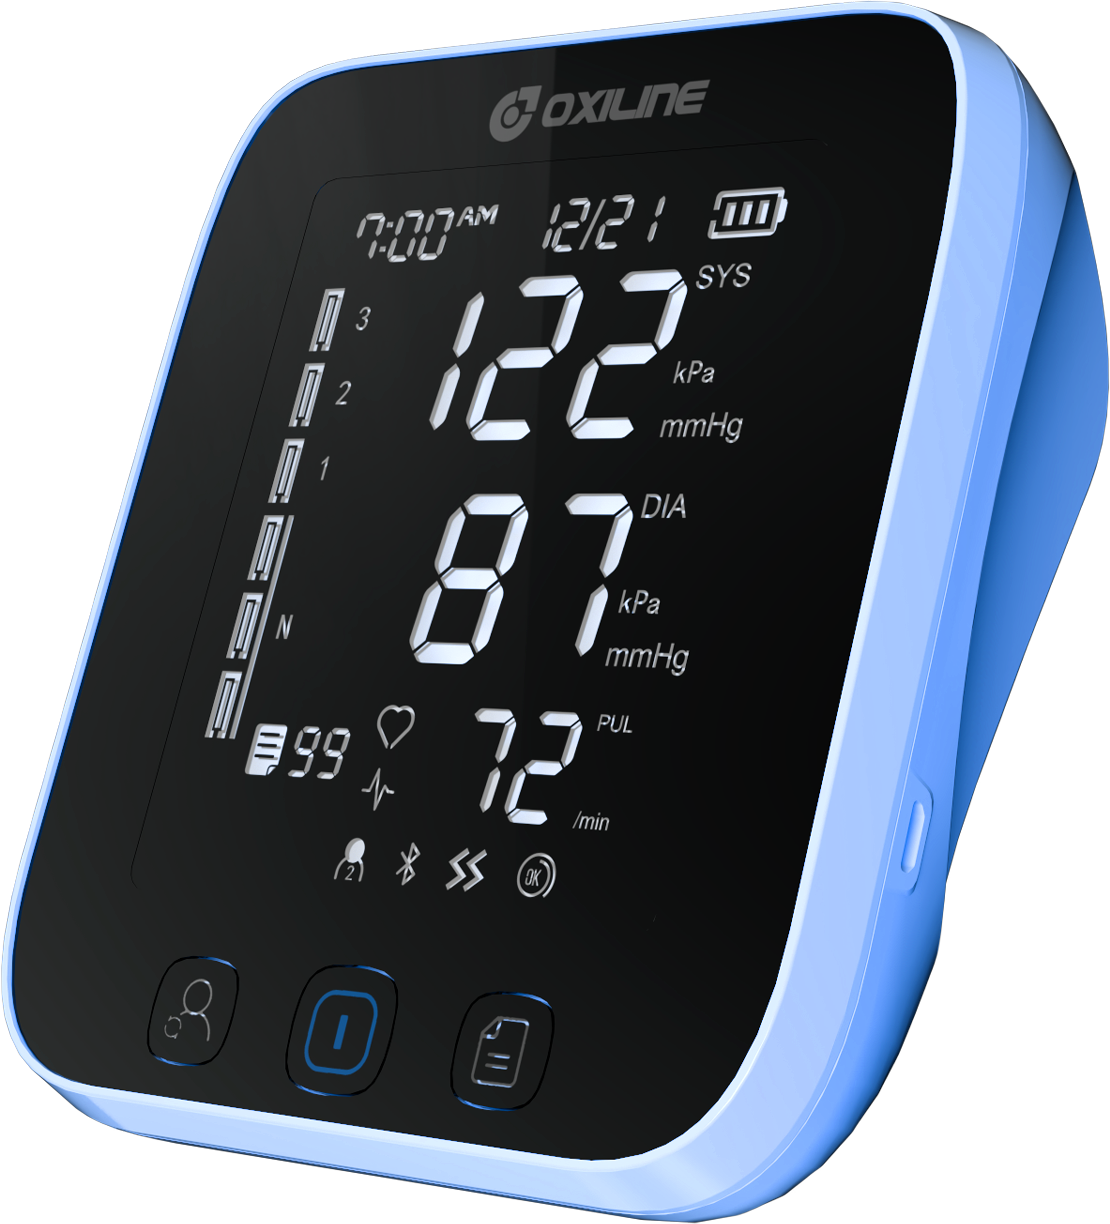 A modern and sleek blood pressure monitor with a floating design and a blue light shining on it, used for measuring systolic and diastolic blood pressure and pulse rate.